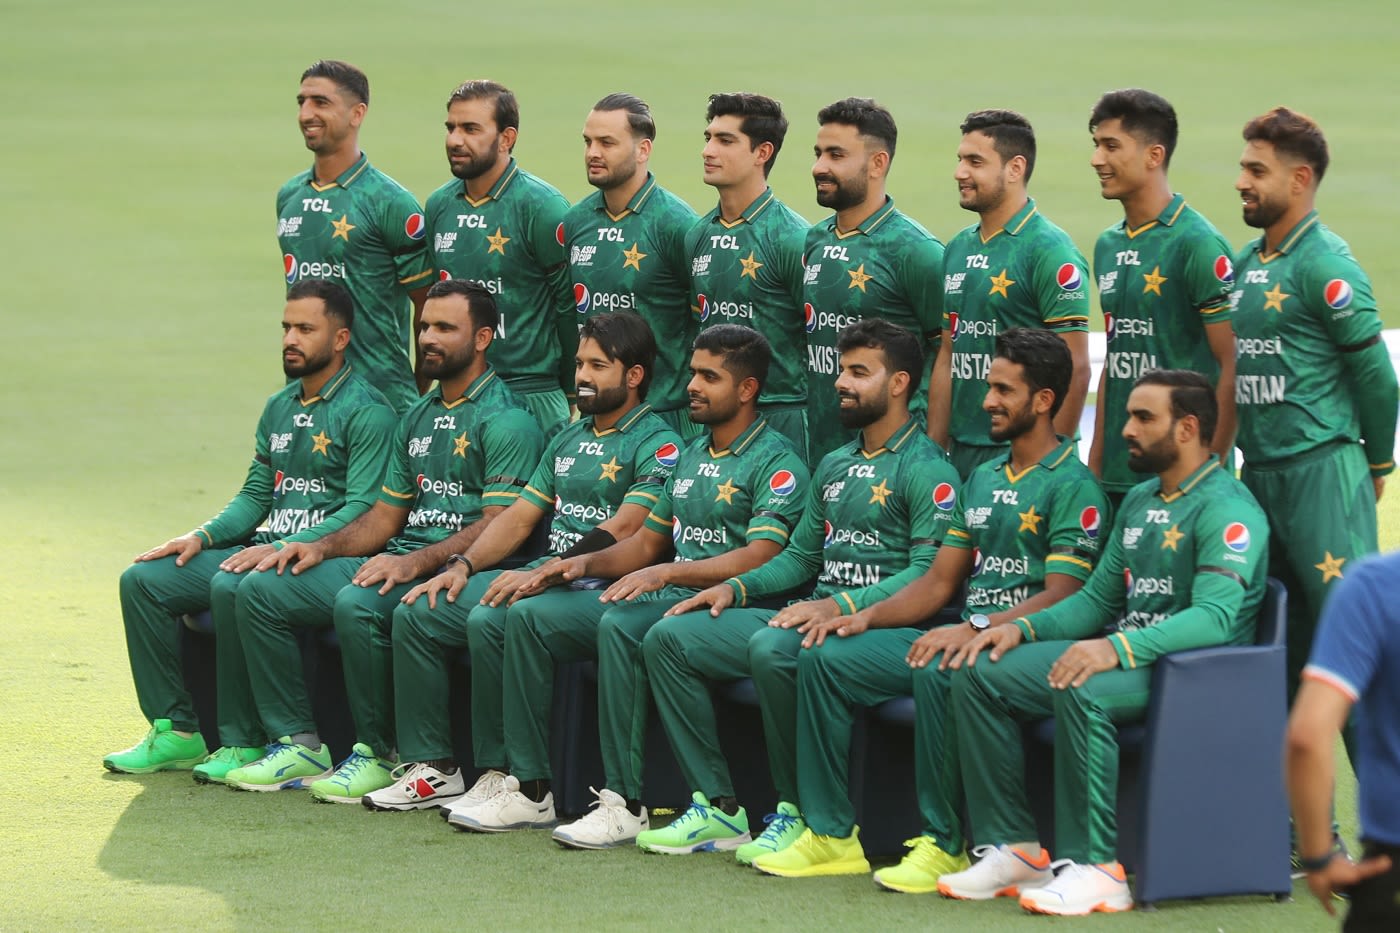 The Pakistan team at a photo session ahead of the game